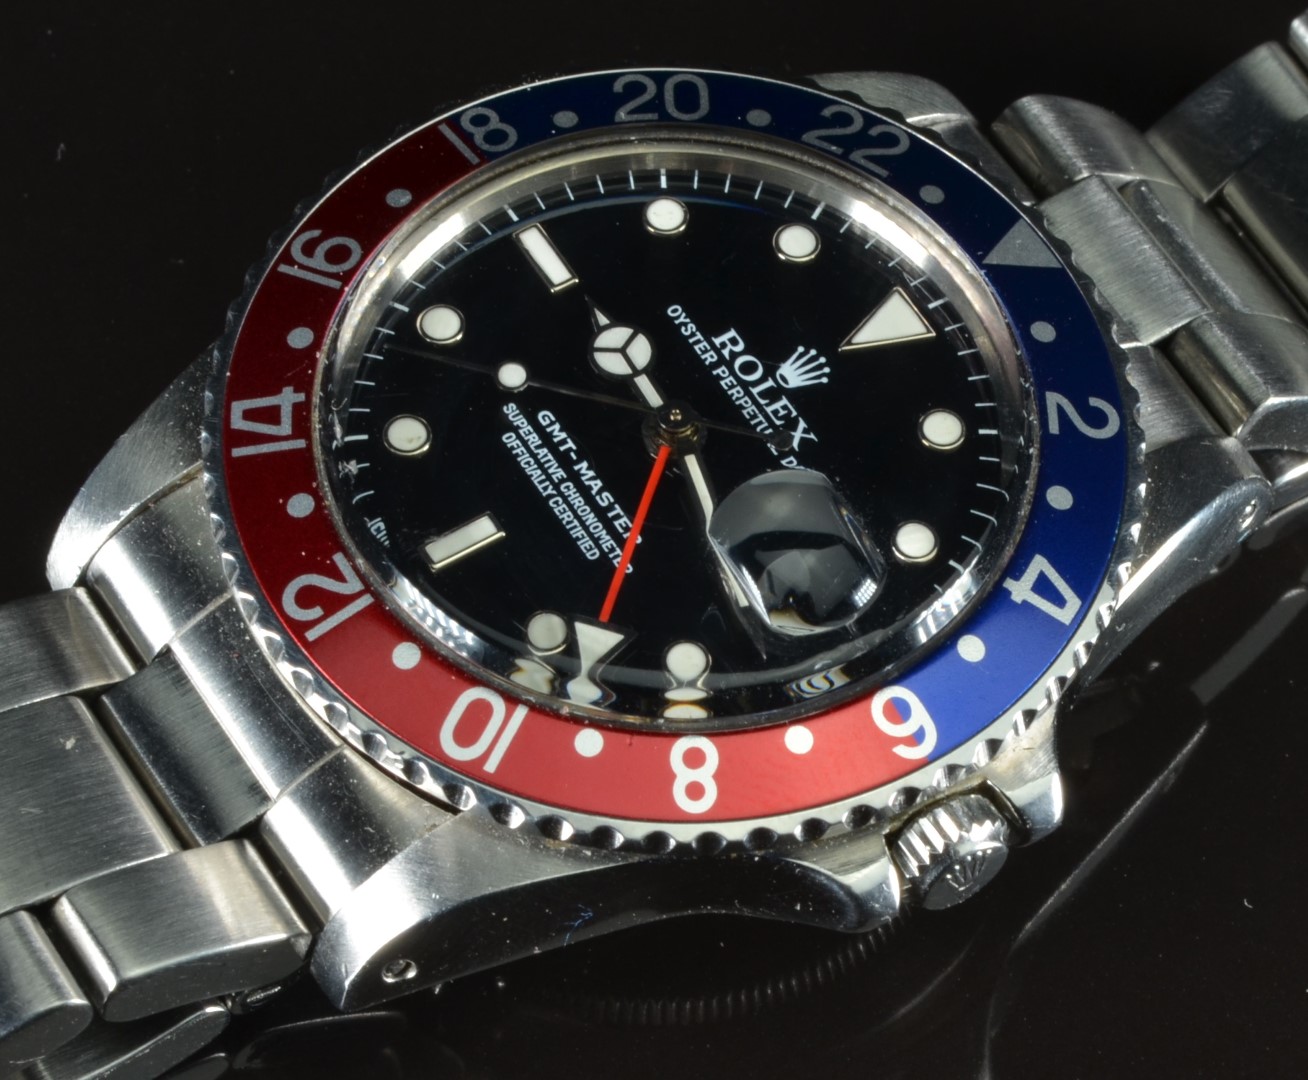 Rolex GMT Master gentleman's diver's/ pilots automatic wristwatch ref. 16750 with date aperture, - Image 5 of 7